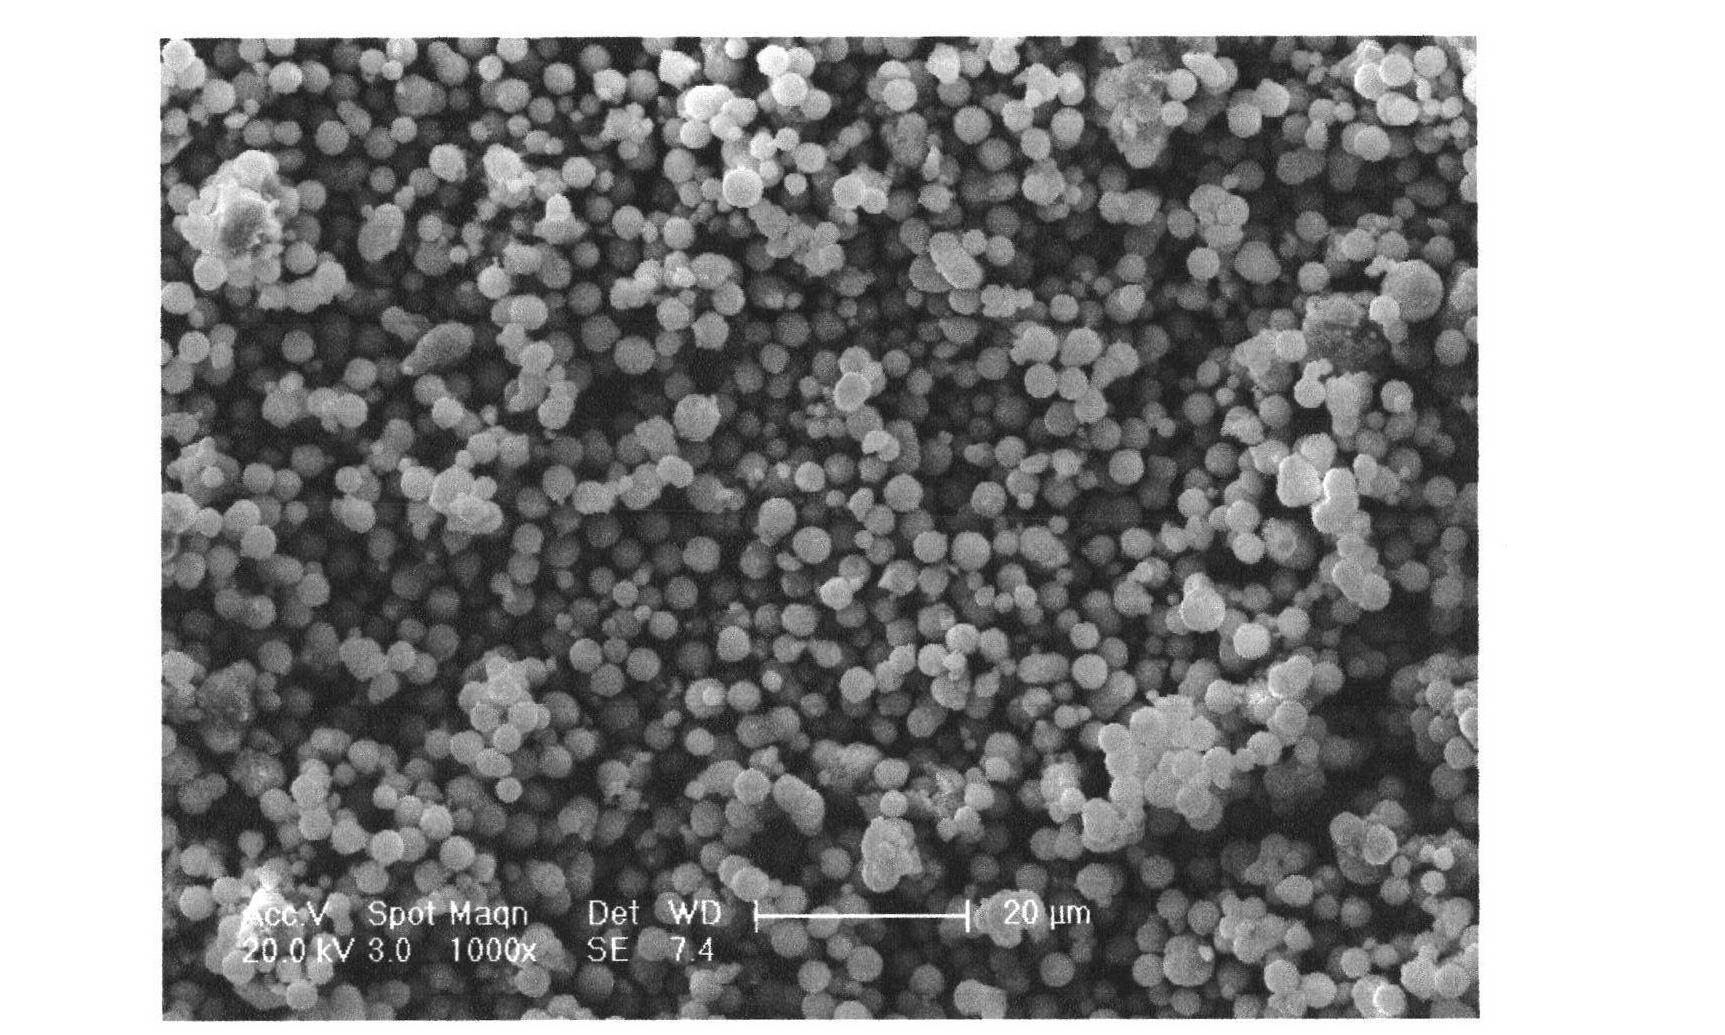 Dendritic macromolecular functional titanium dioxide micro particle toughening agent and epoxy resin